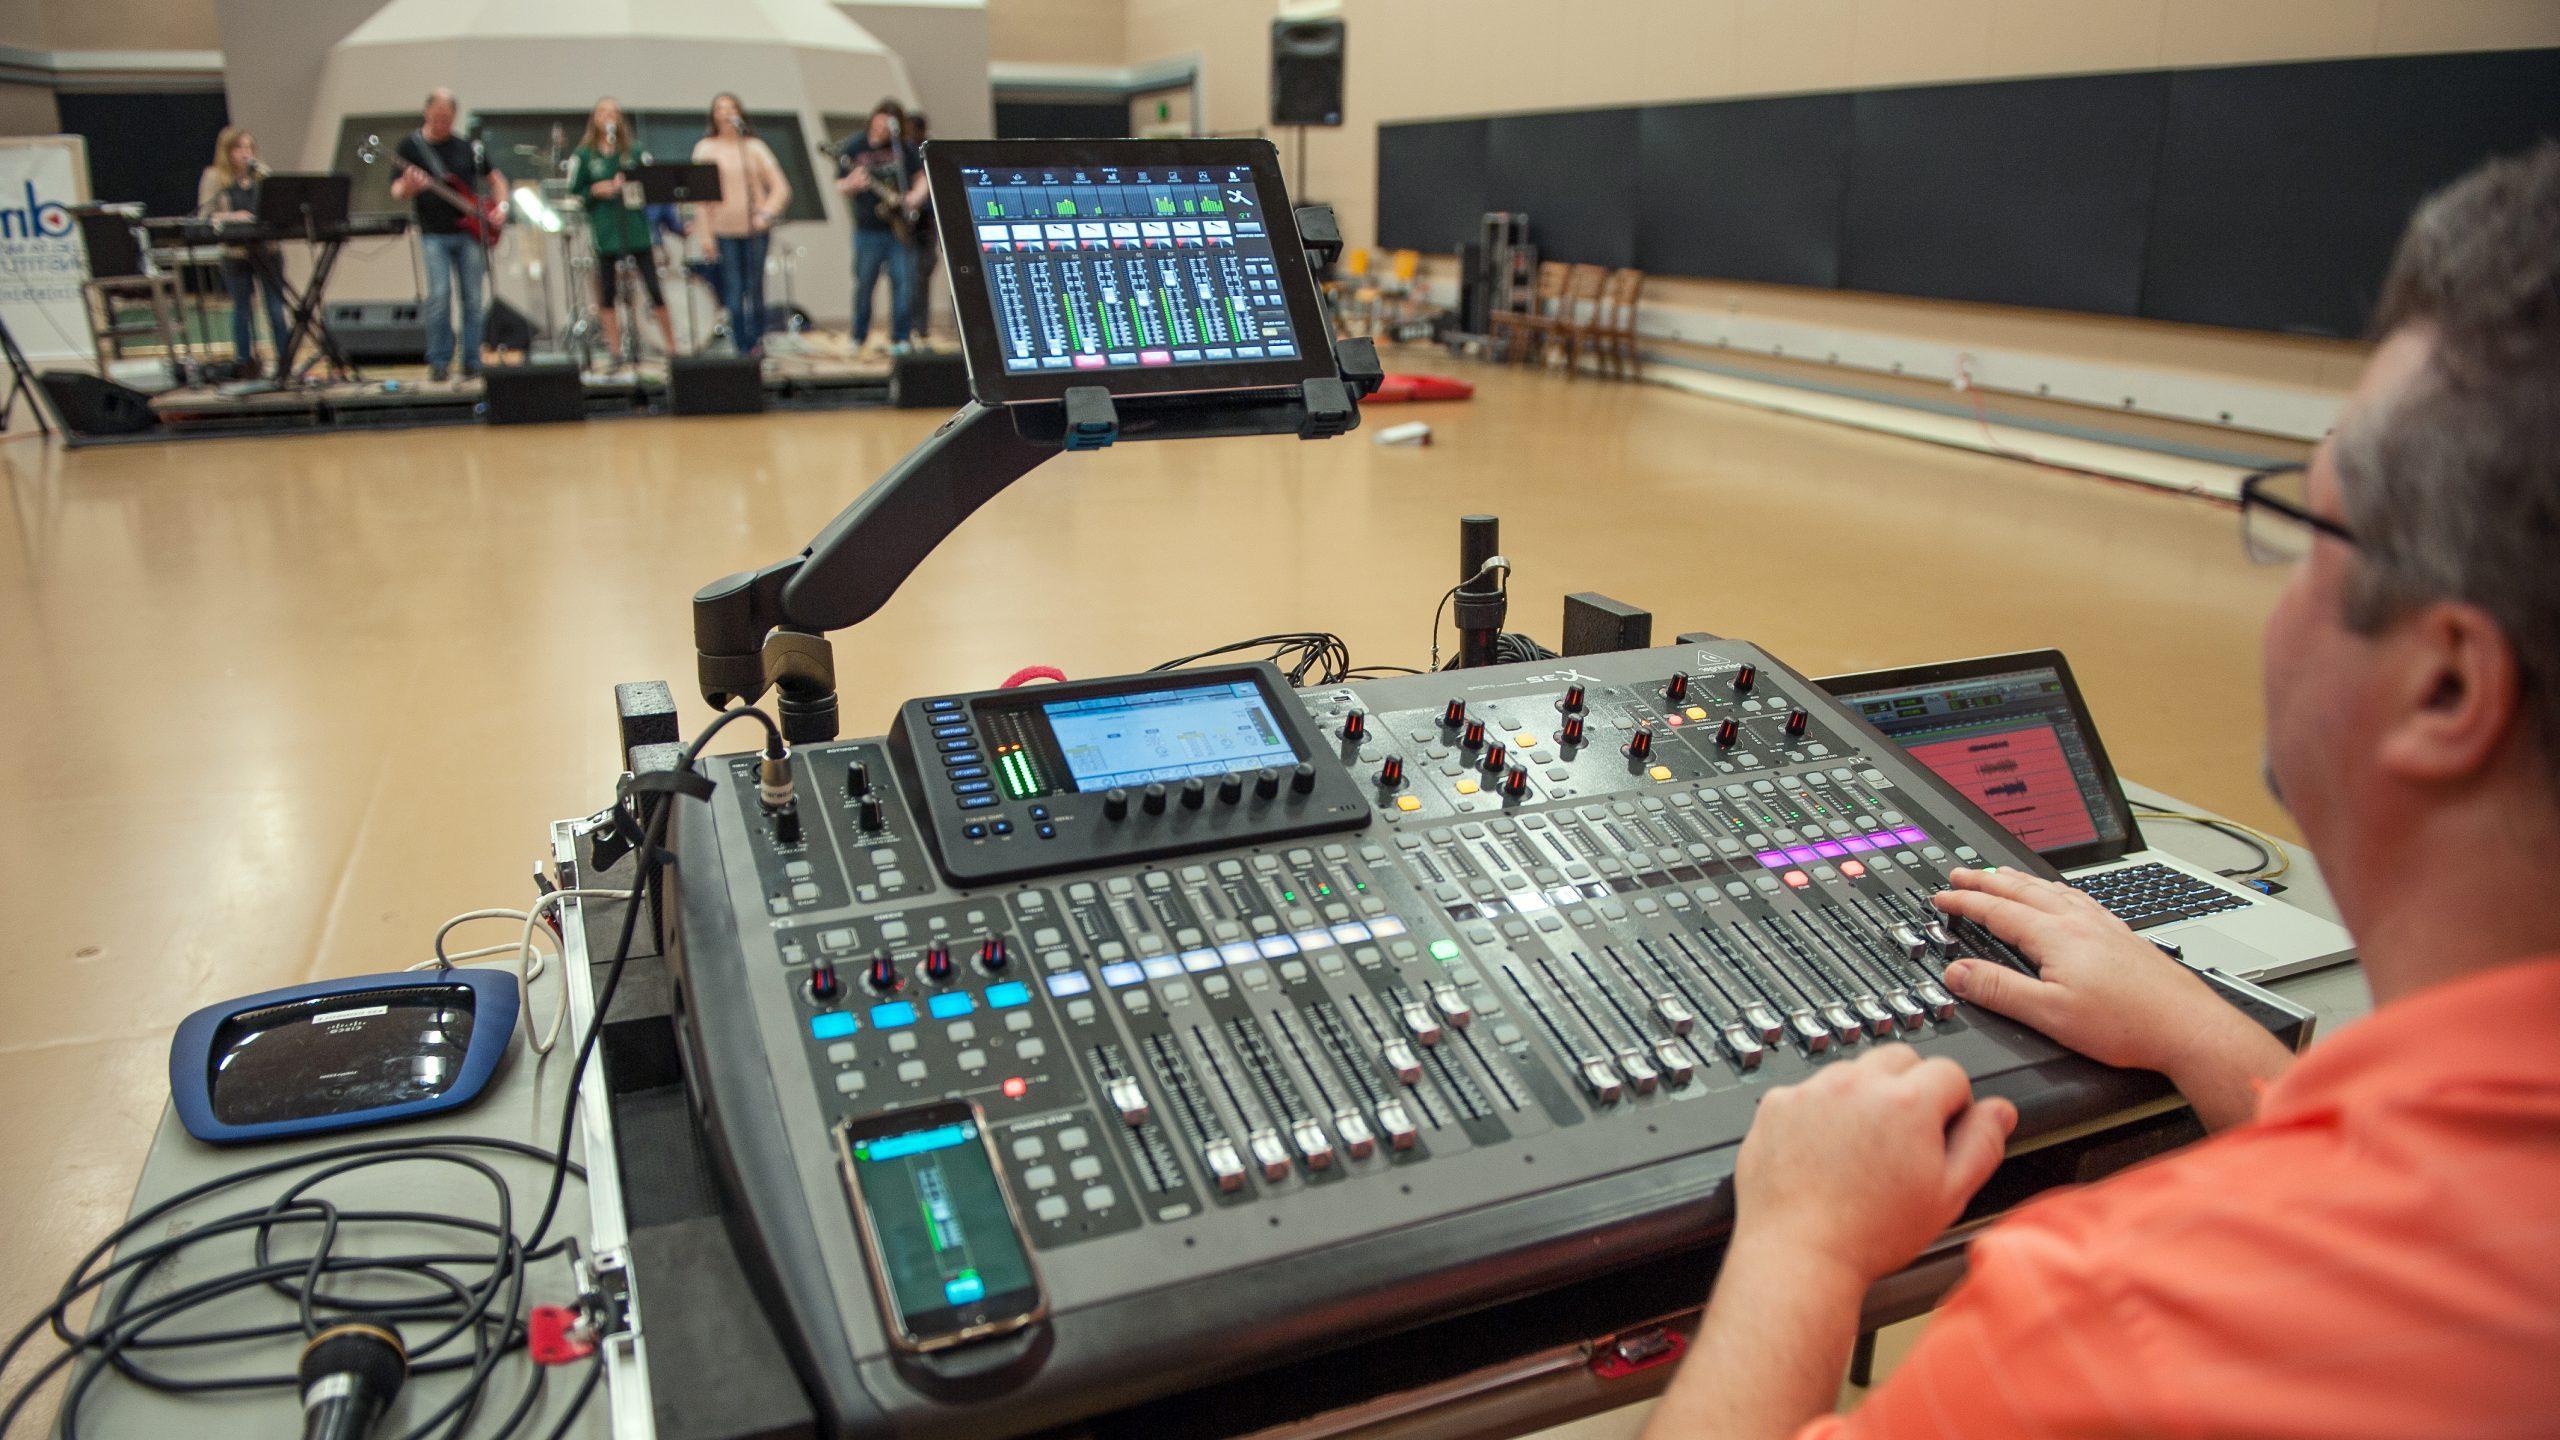 Man controlling digital sound board for a 6-piece band performing on a stage.